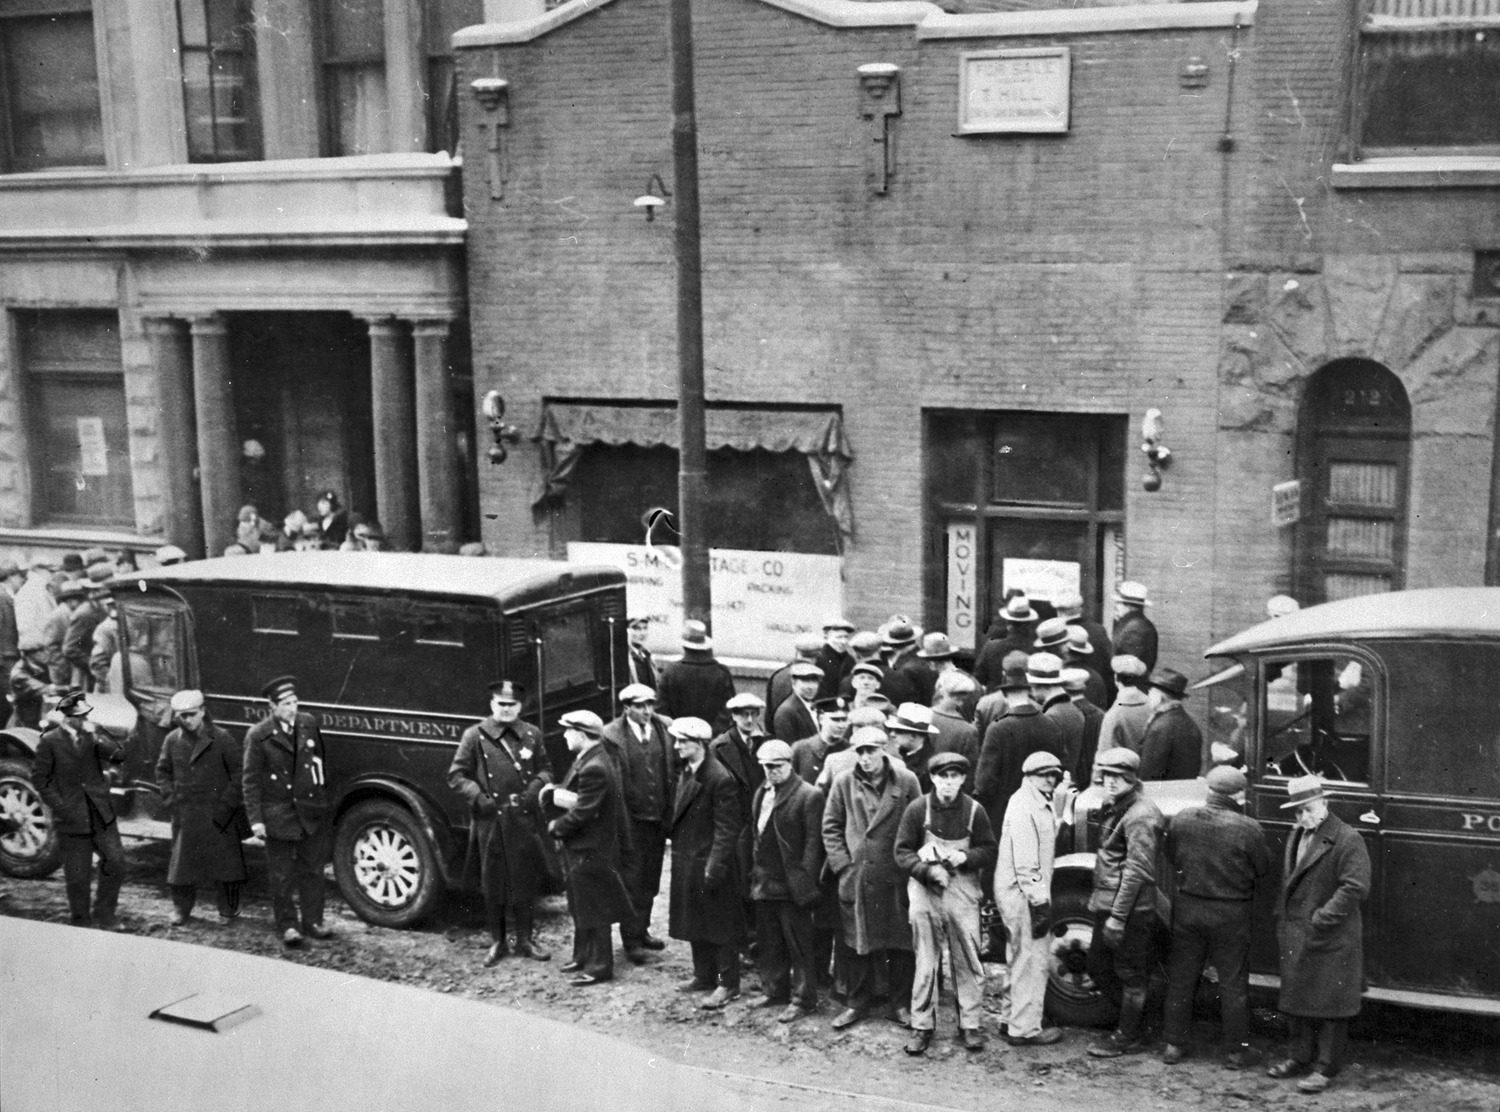 View of crowd and policemen at garage on Clark Street, site of St. Valentine's Day Massacre, c. 1929.